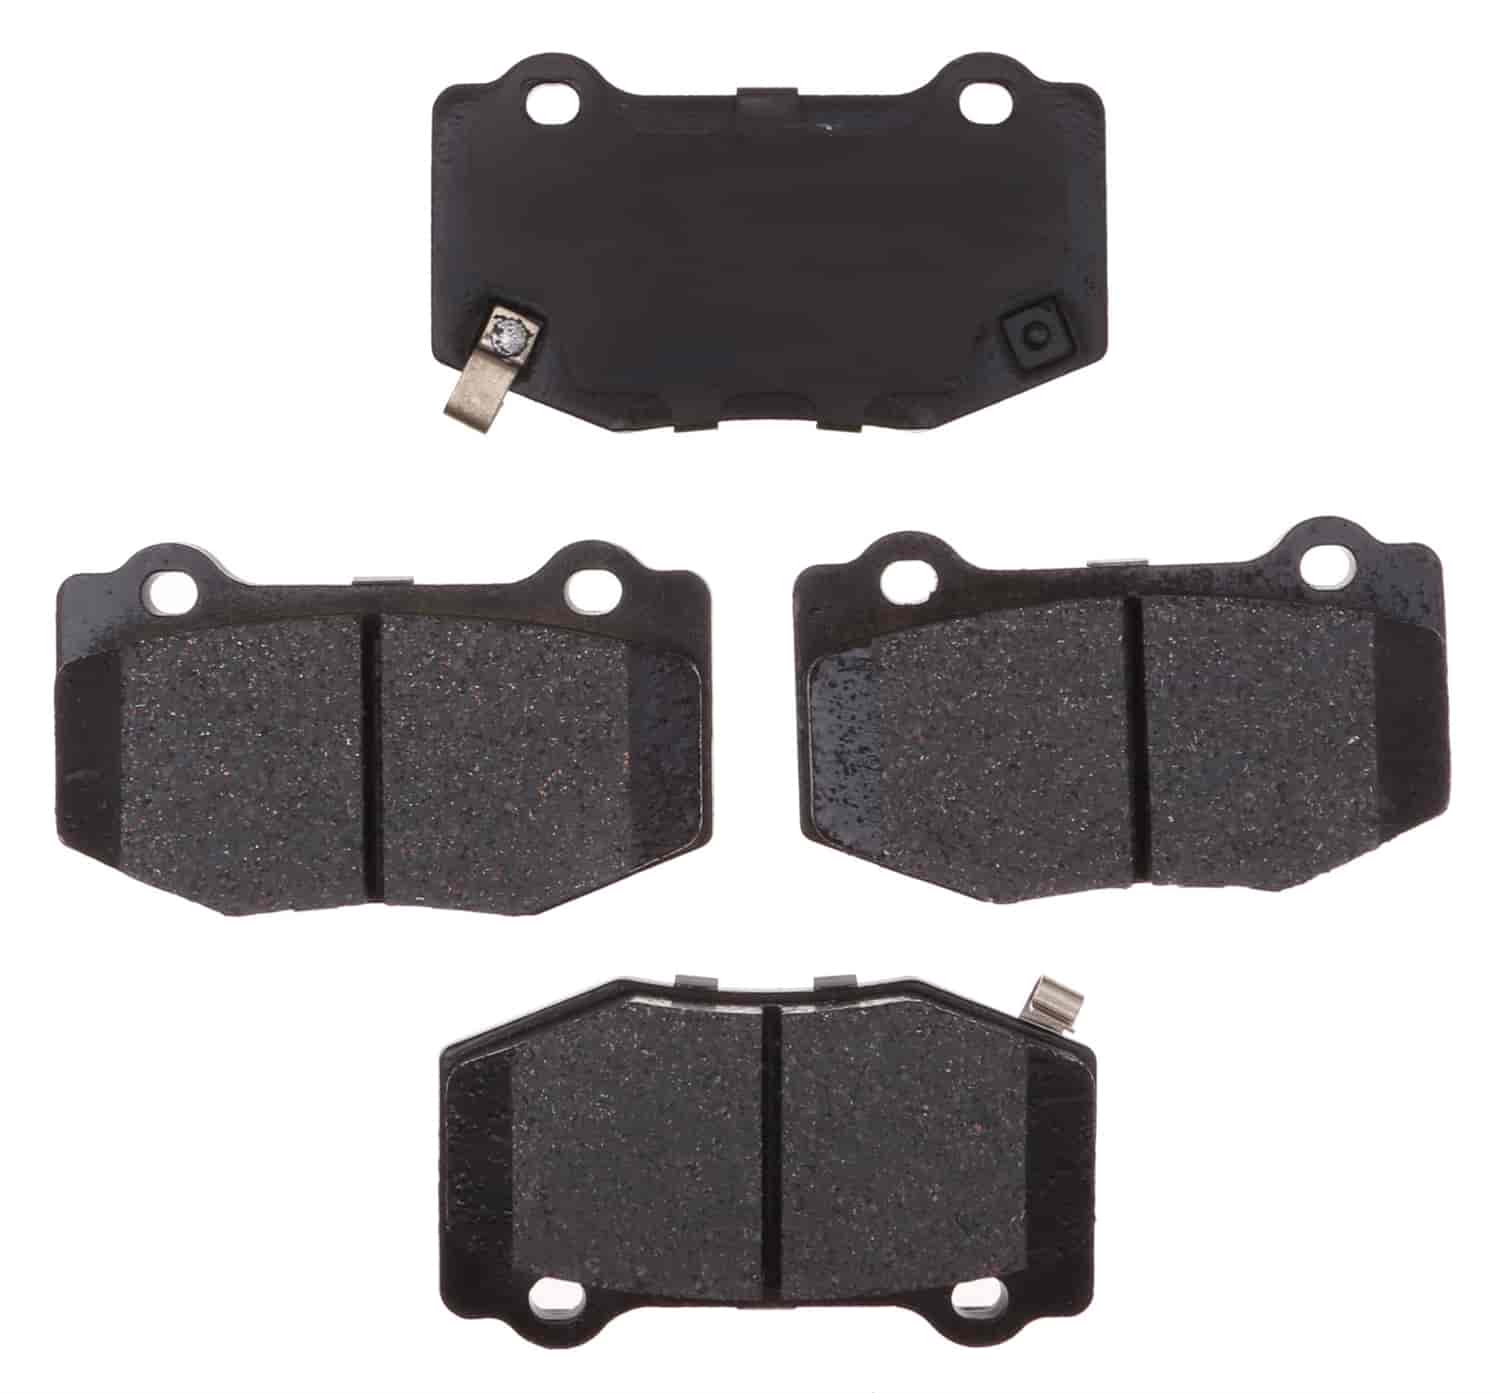 Performance Ceramic Disc Brake Pads for Ford & GM [Rear]